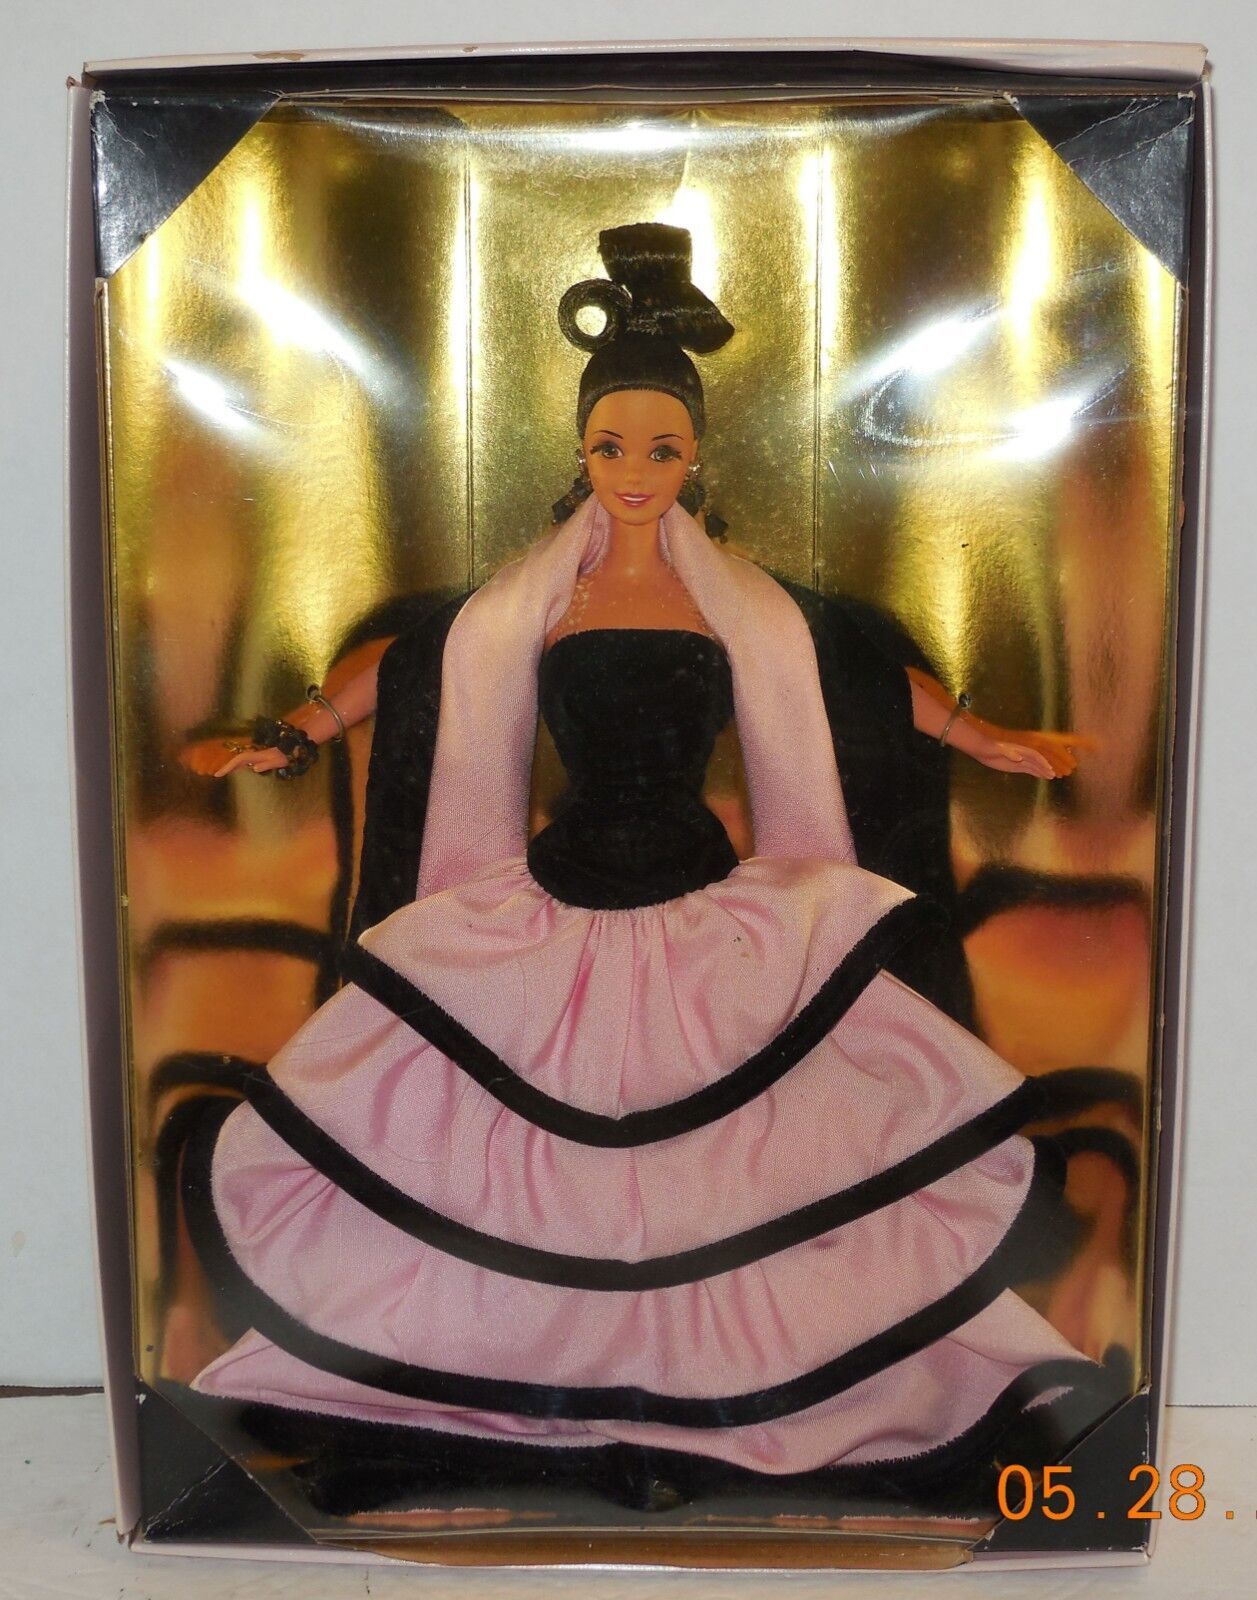 Primary image for Mattel House Of Escada Brian Rennie Pink & Black Barbie Limited Edition NRFB